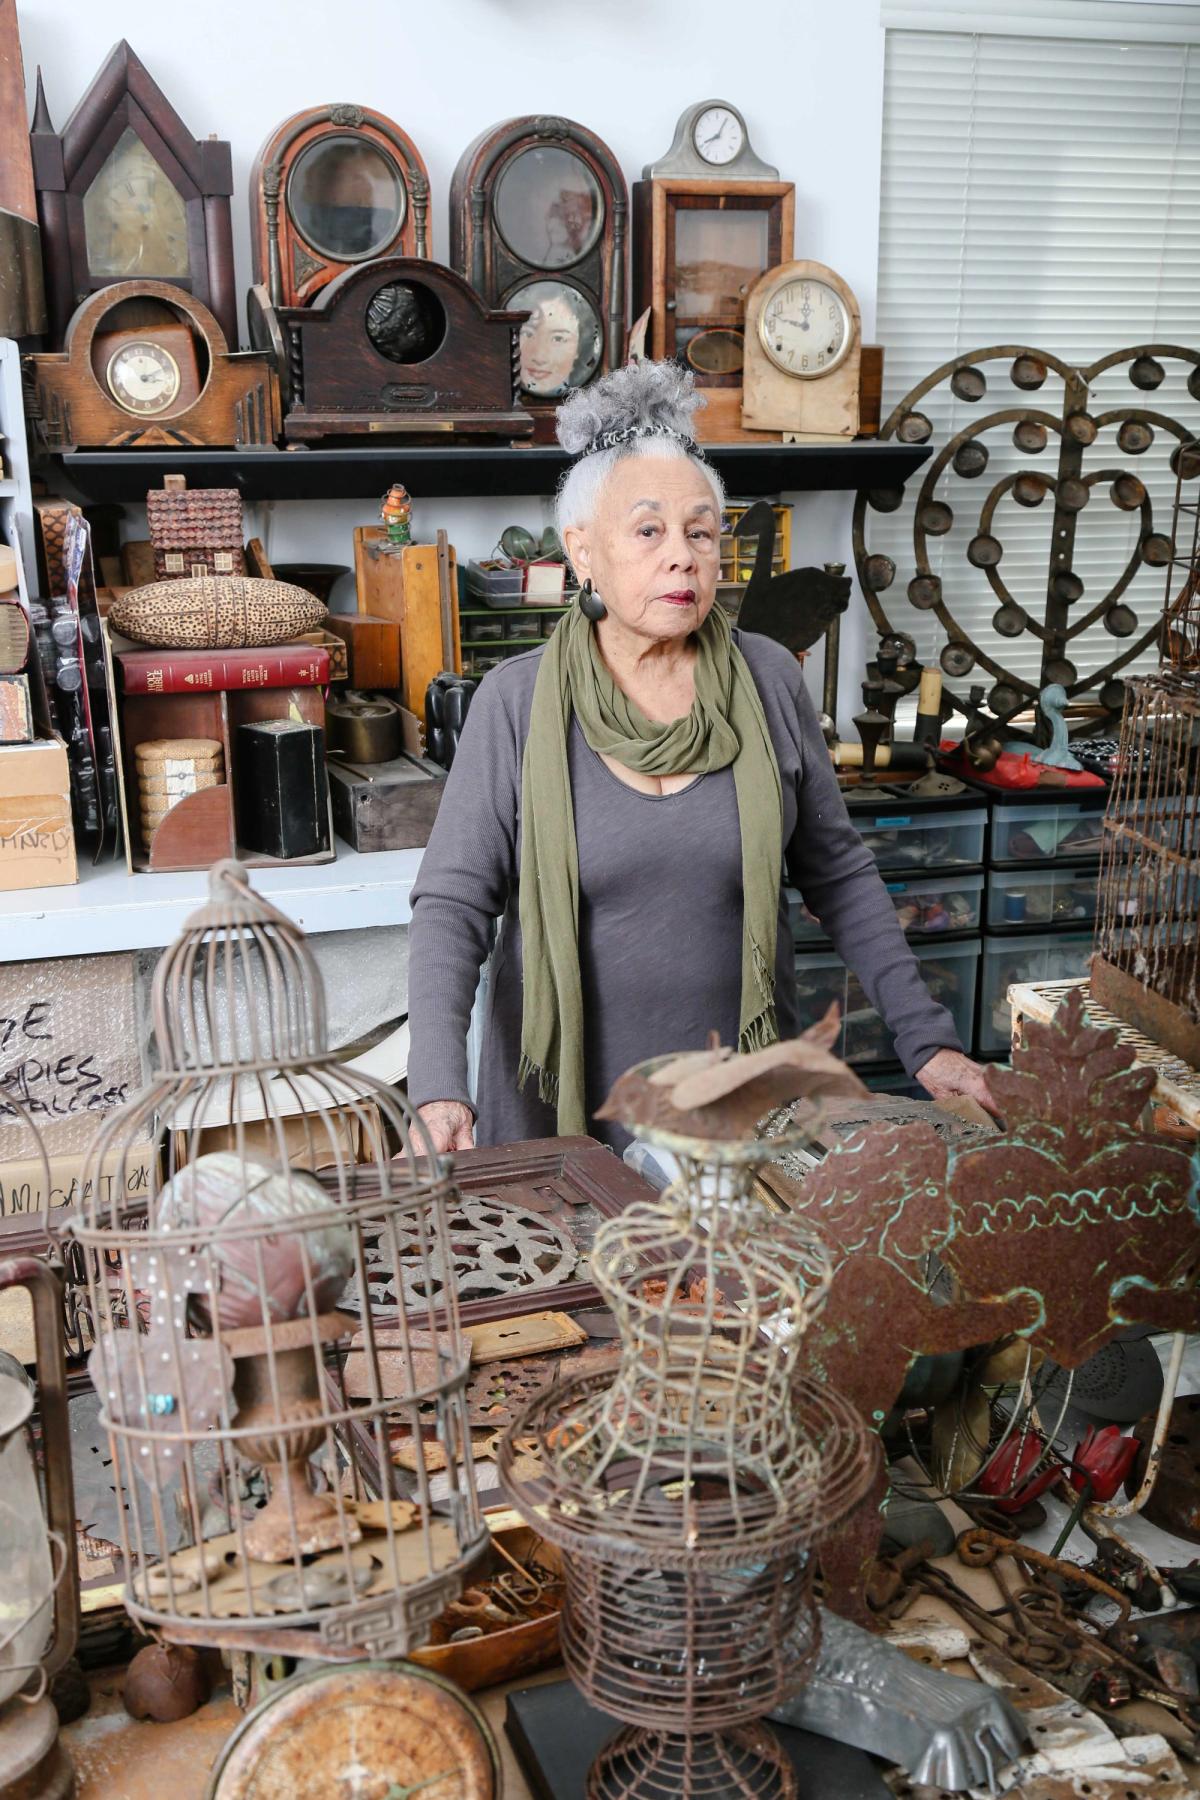 Betye Saar in her Los Angeles studio in 2015 Photo: Ashley Walker; courtesy of the artist and Roberts Projects, Los Angeles